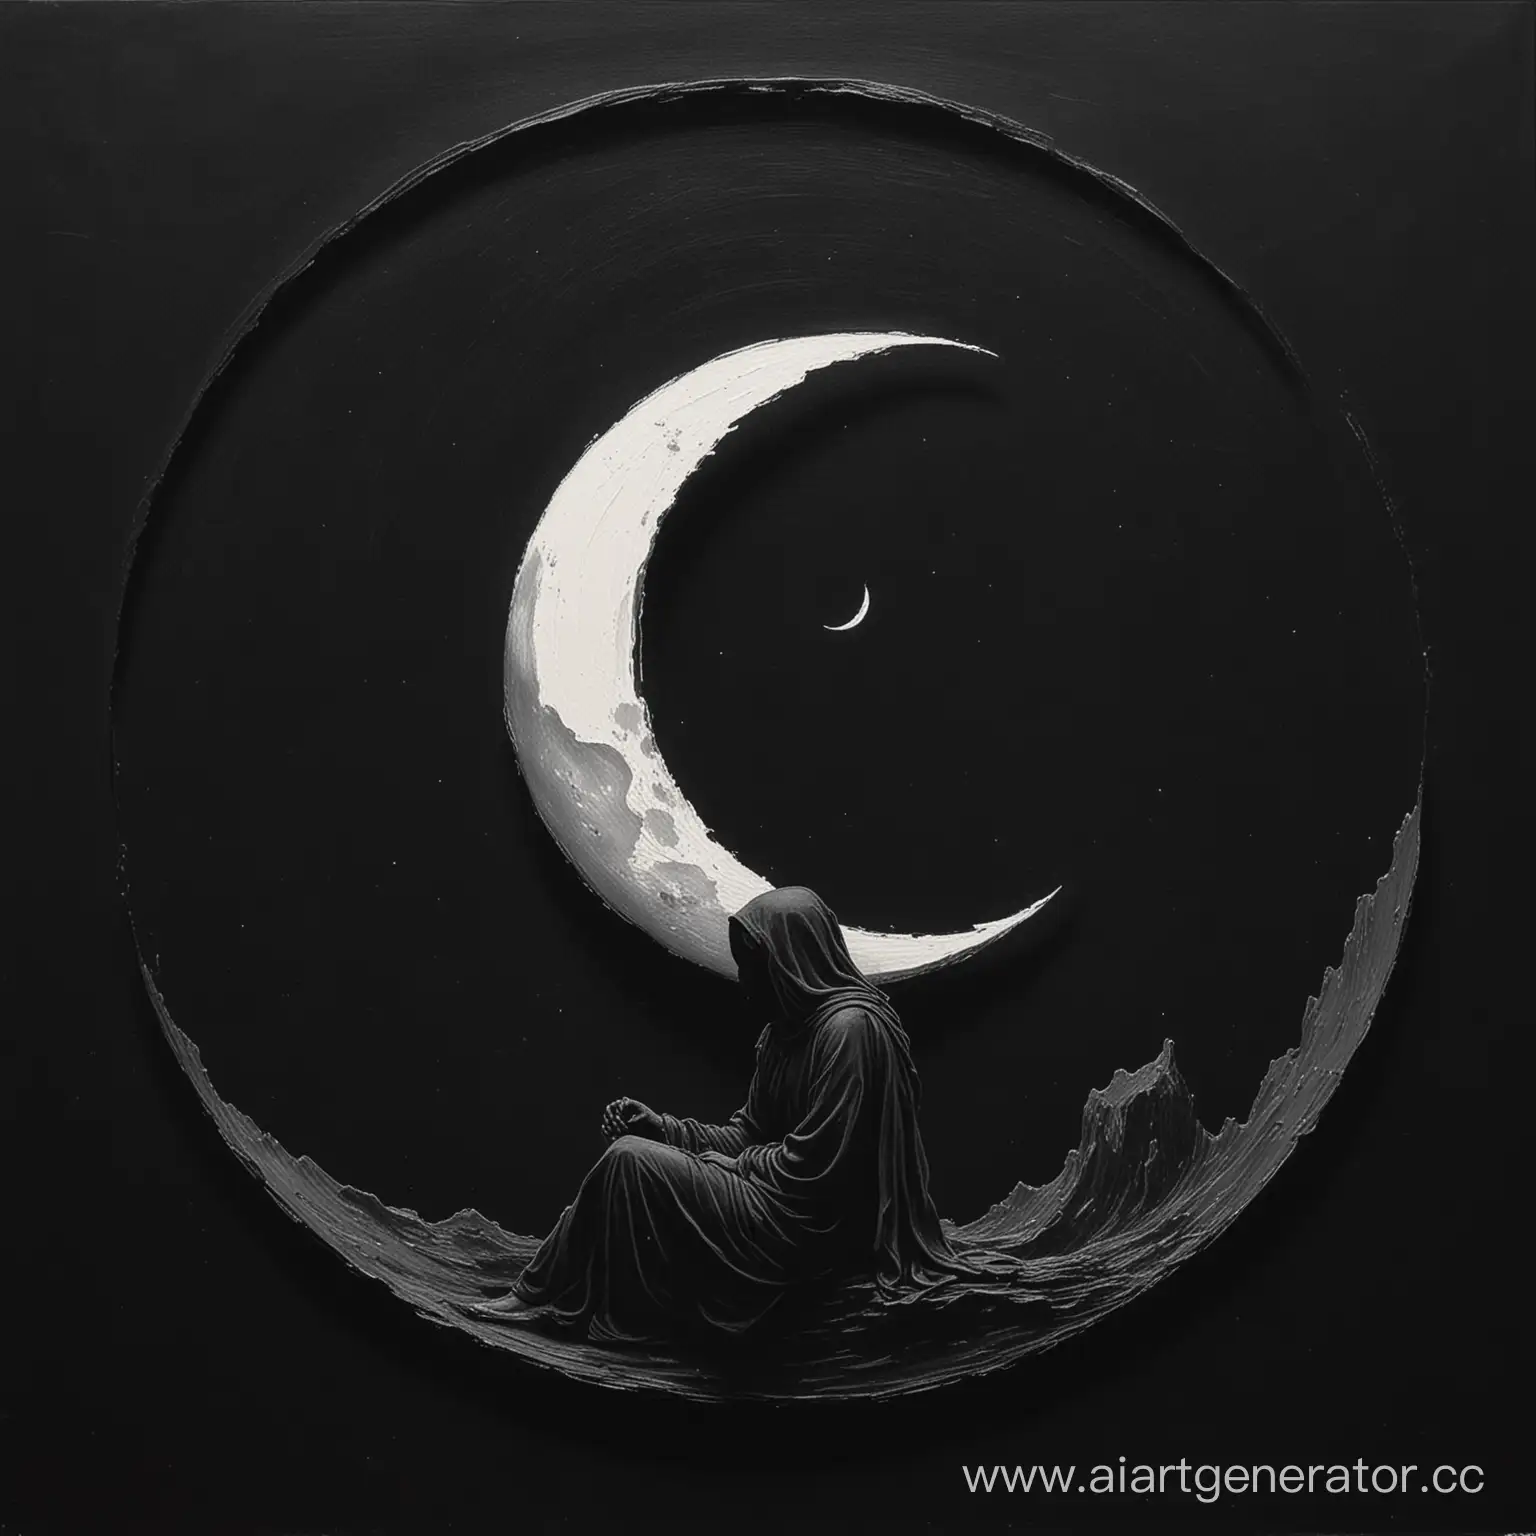 Mysterious-Figure-on-Crescent-Moon-Dark-Sketch-in-Oil-Painting